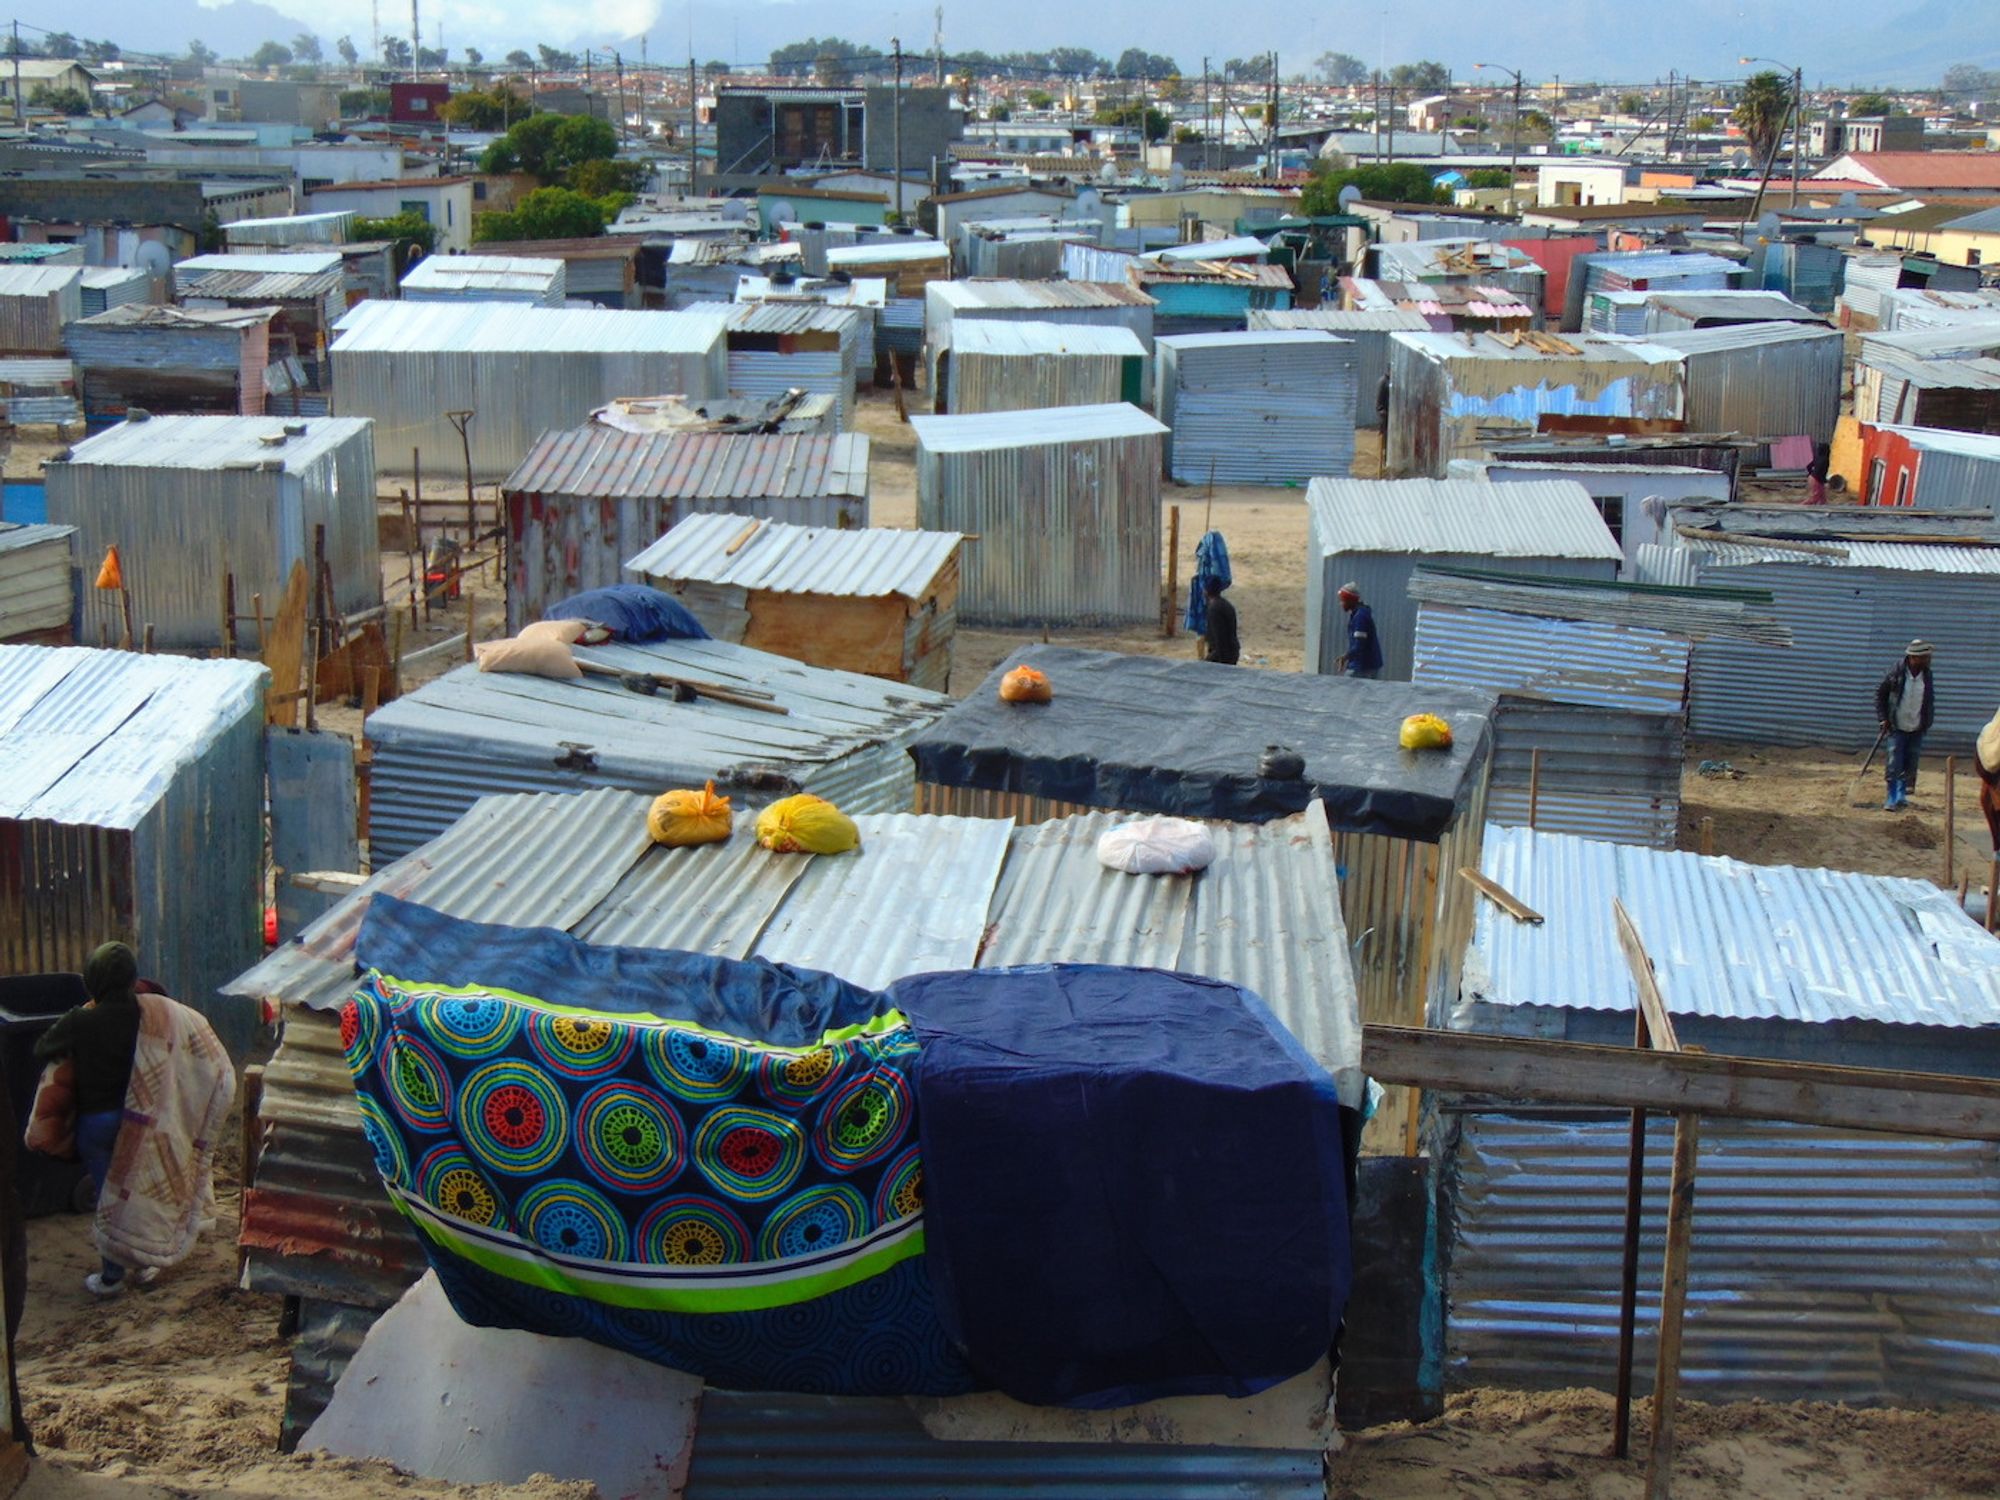 In Photos: 'Covid' is Cape Town's New Informal Settlement for Those Displaced by the Pandemic